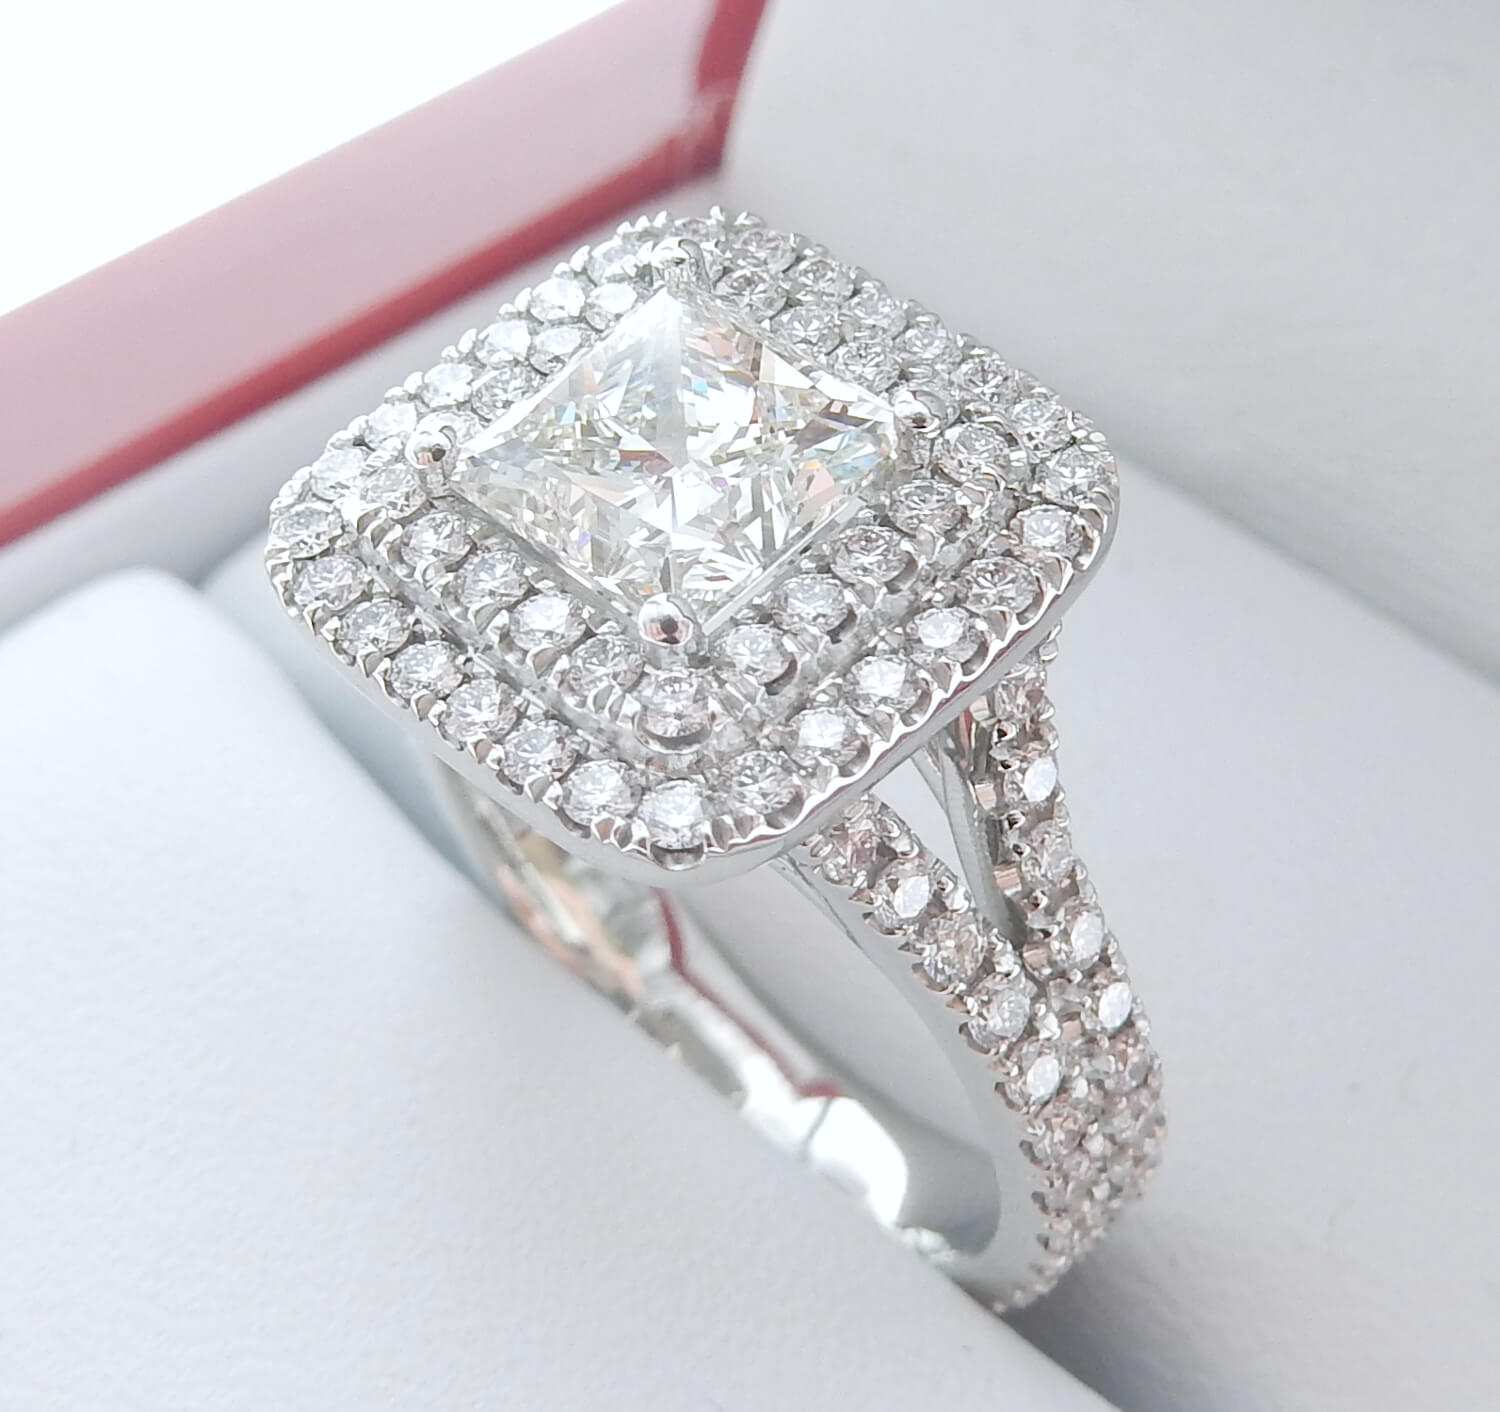 2023 Engagement Ring Trends